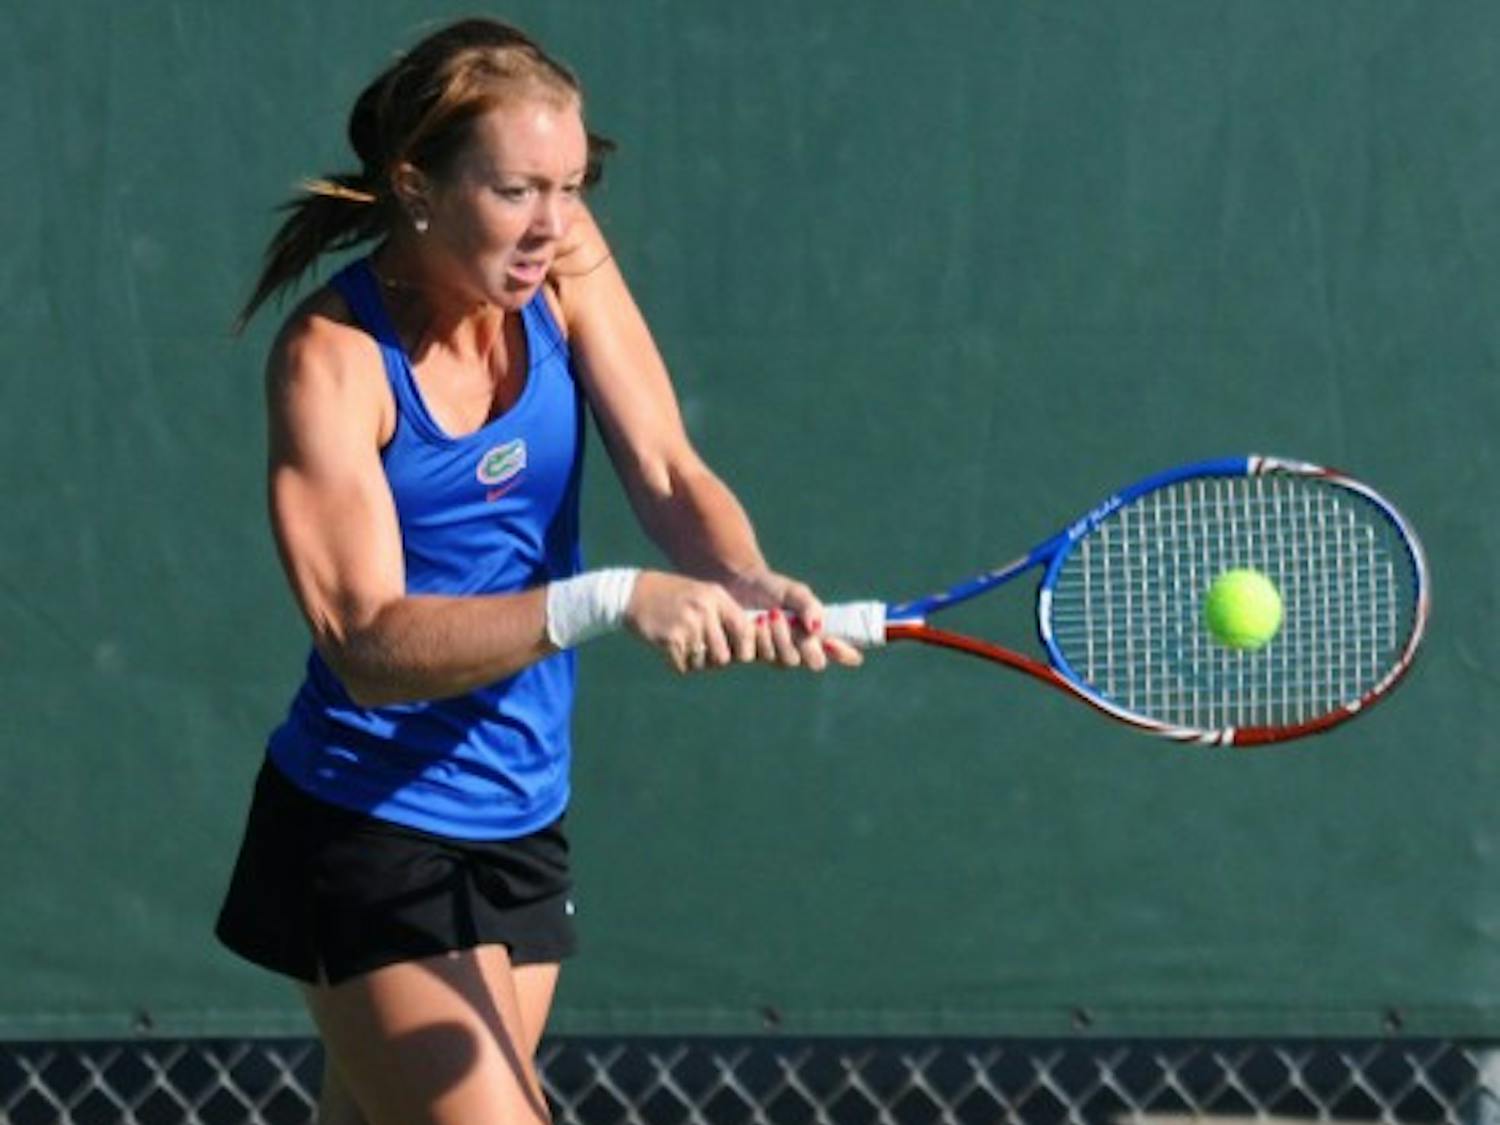 UF senior Lauren Embree won her first Grand Slam tournament of her collegiate career on Sunday. Embree defeated Virginia's Julia Elbaba in three sets to clinch the Riviera/ITA All-American Tournament.